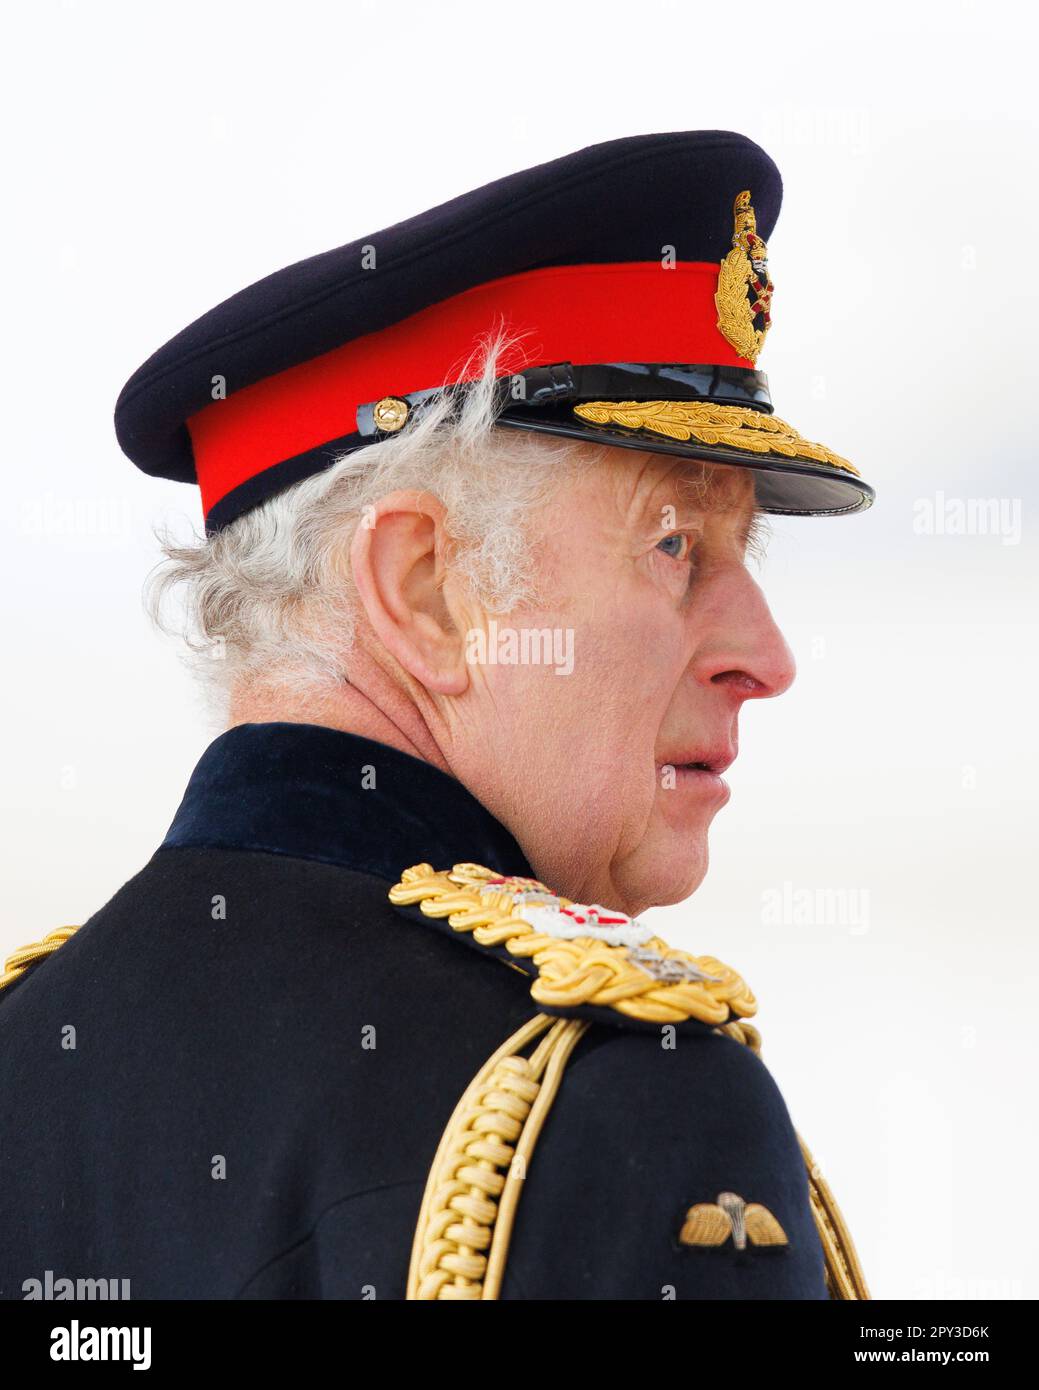 His Majesty the King inspects the 200th Sovereign's Parade at Royal Military Academy, Sandhurst.  His Majesty The King inspects the 200th Sovereign's Stock Photo